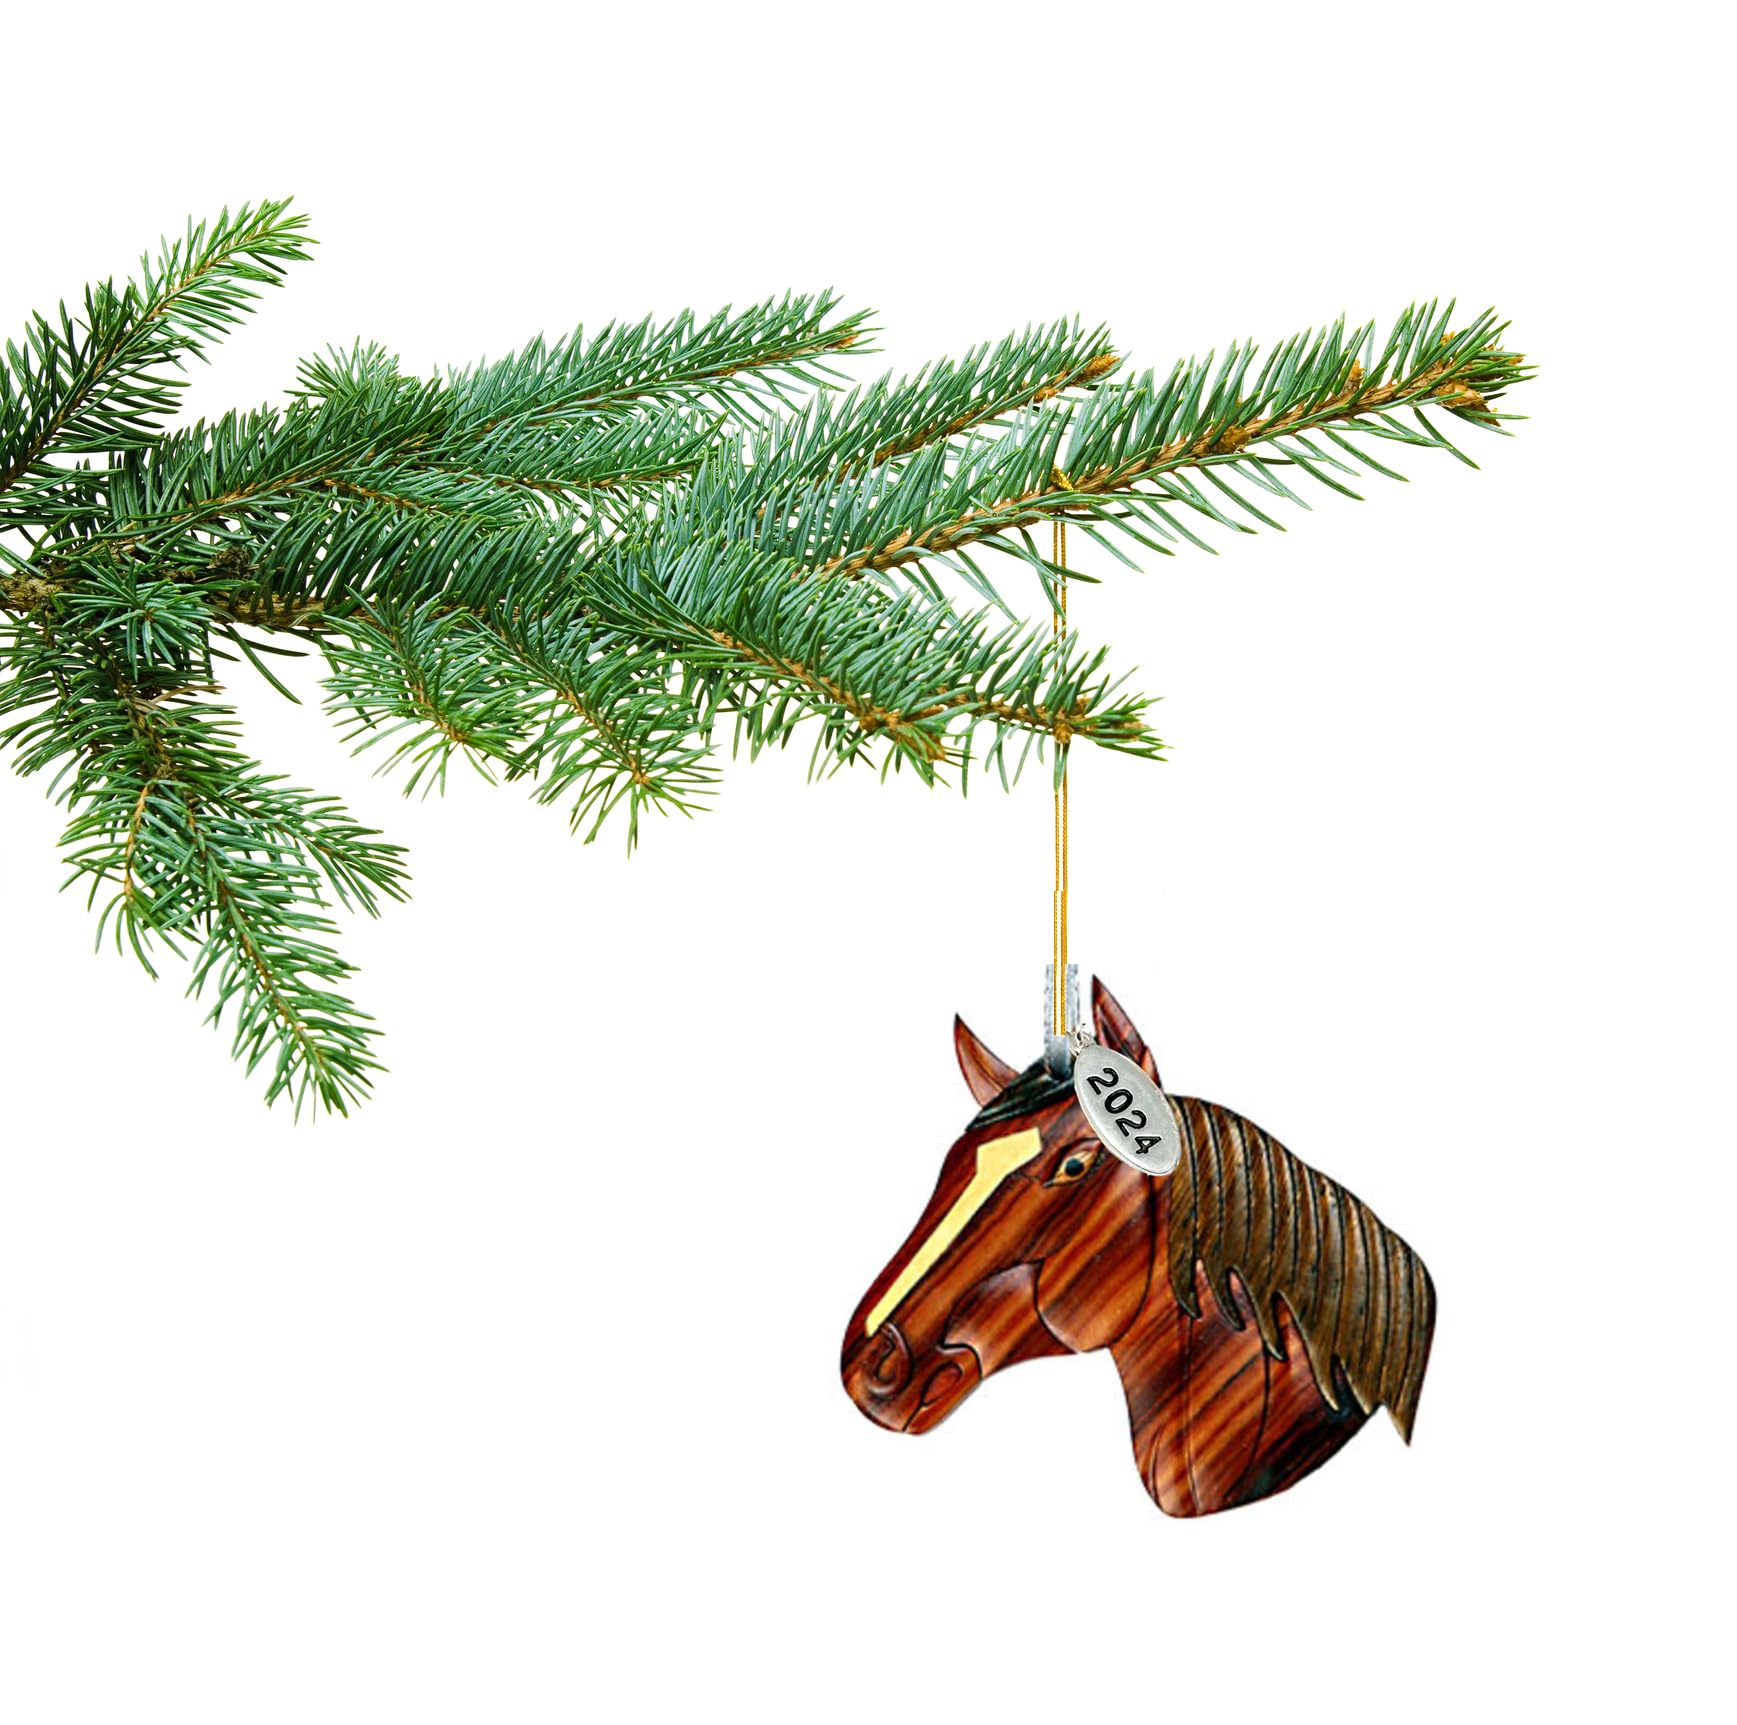 Horse Ornament - Horse Christmas Ornament 2024 - Two-Tone Wood Christmas Ornament - Intarsia Design - Comes in A Gift Box So It's Ready for Giving